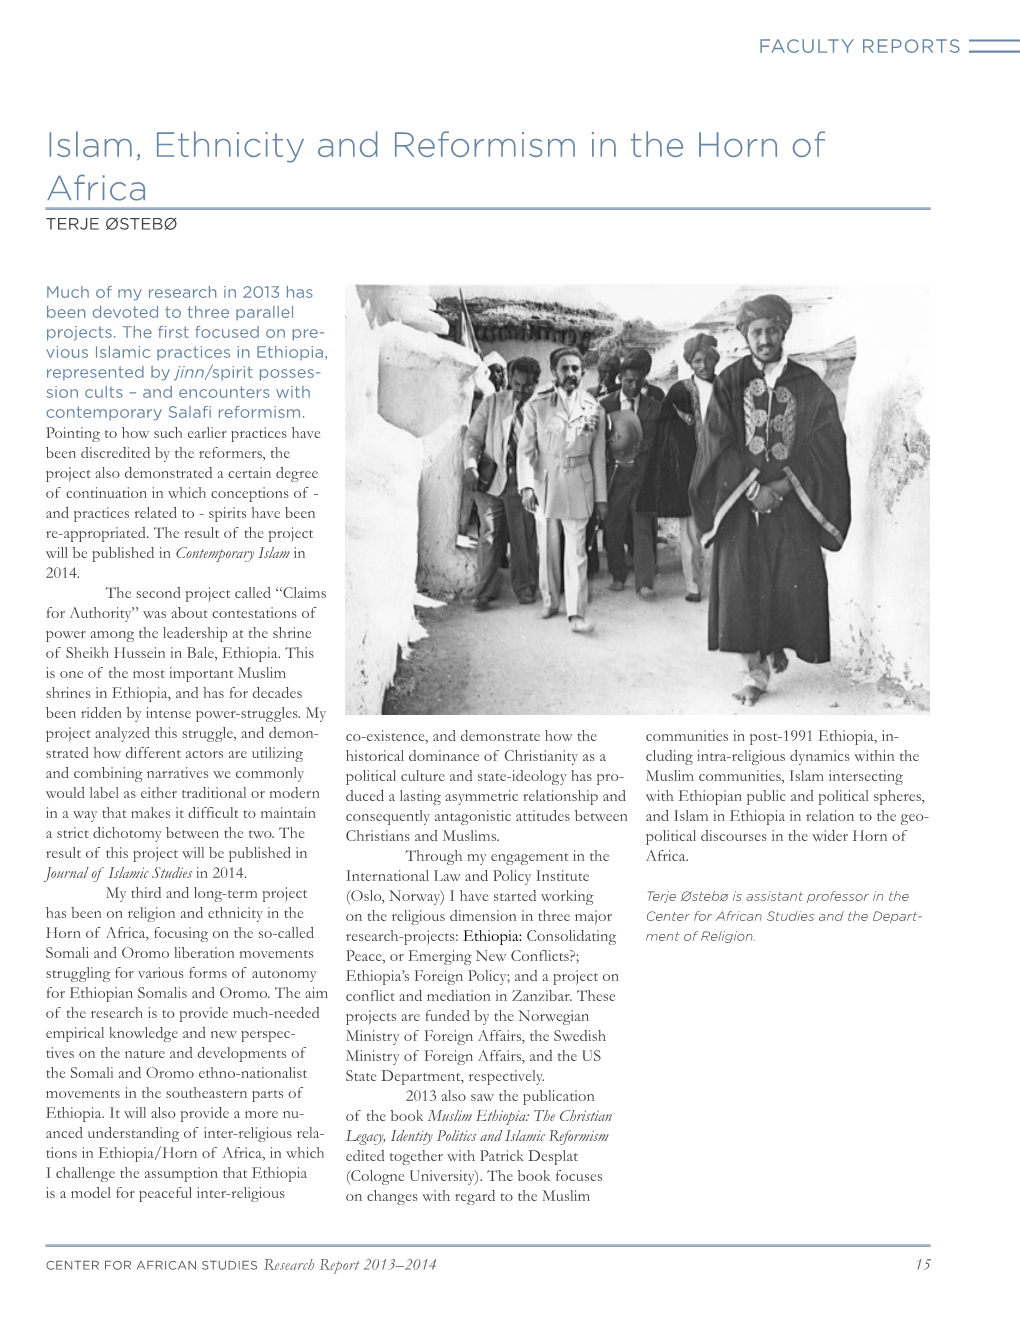 Islam, Ethnicity and Reformism in the Horn of Africa TERJE ØSTEBØ